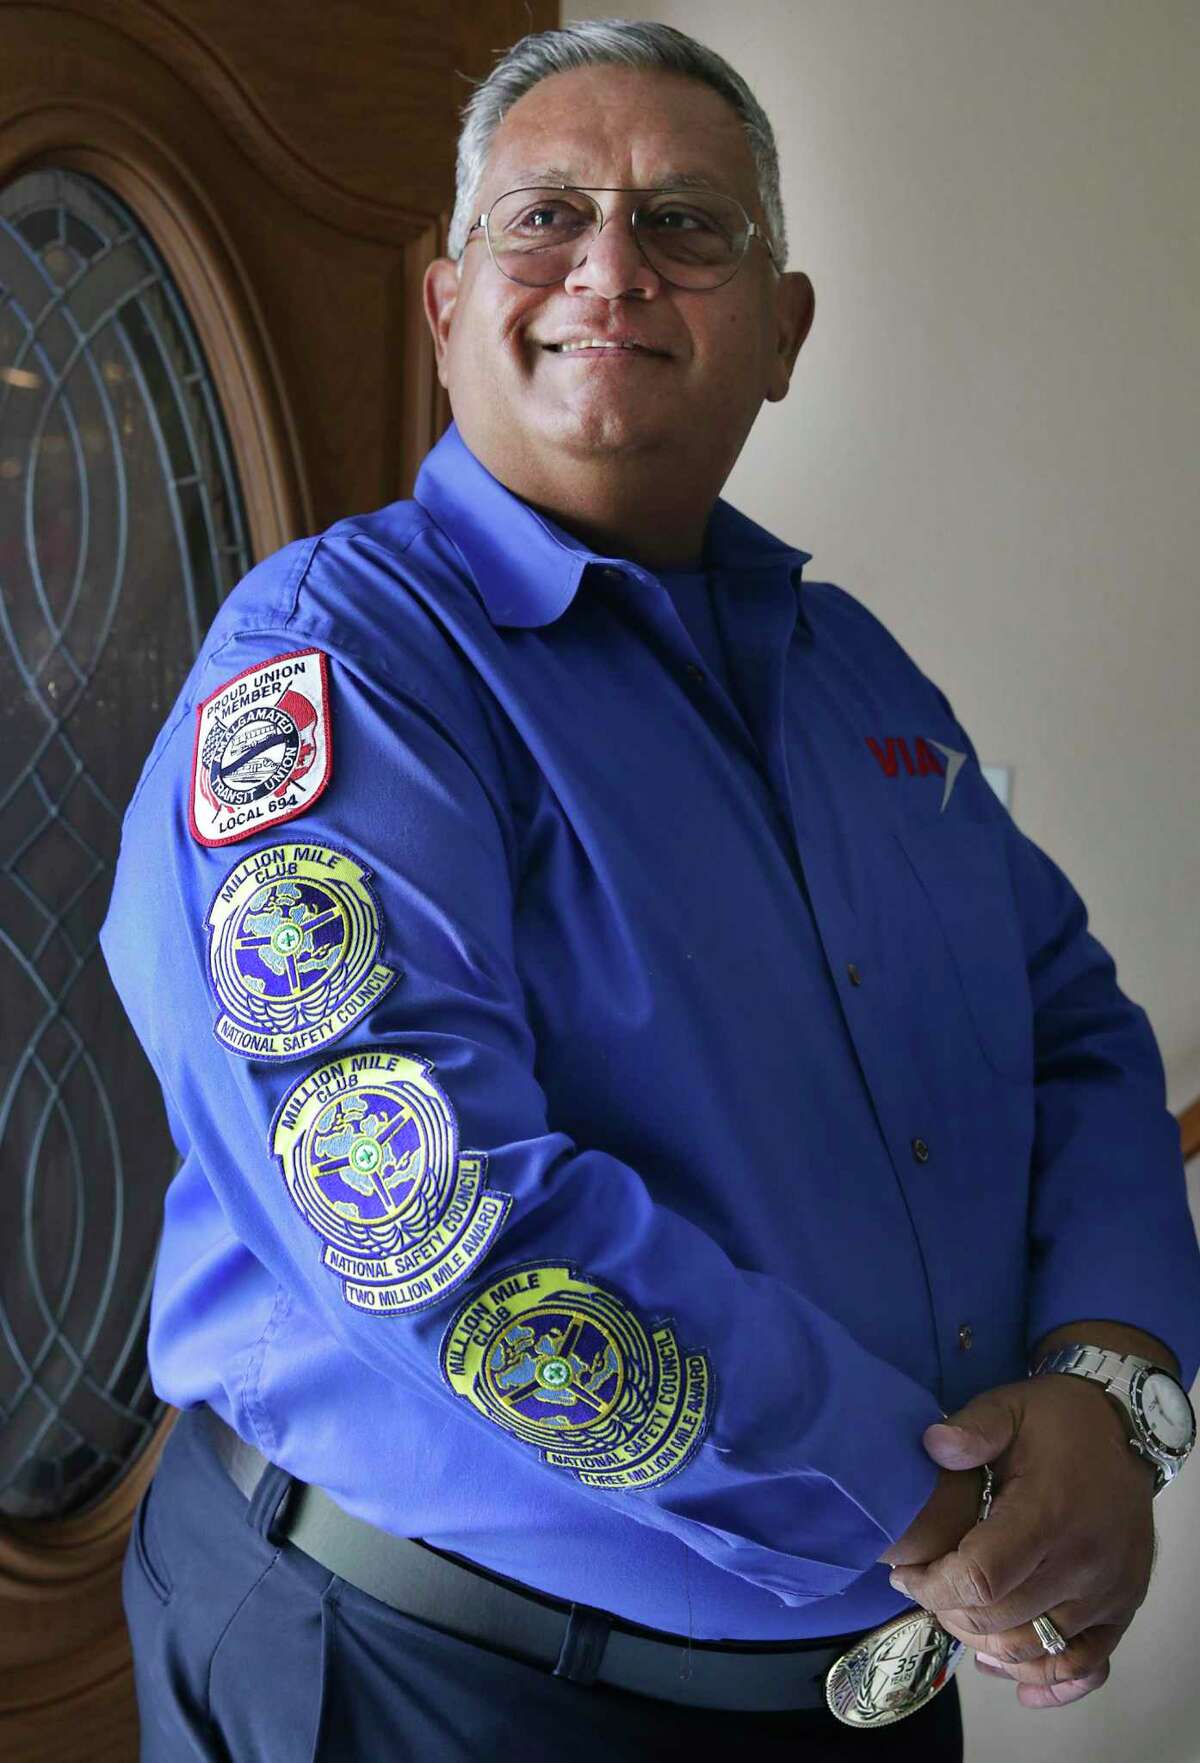 Roy Chapa, a VIA bus operator, etired after 41 years of driving the streets of San Antonio accumulating a whopping 3 million miles. The patches on his work shirt indicate his accomplishments of millions of miles, from the National Safety Council.